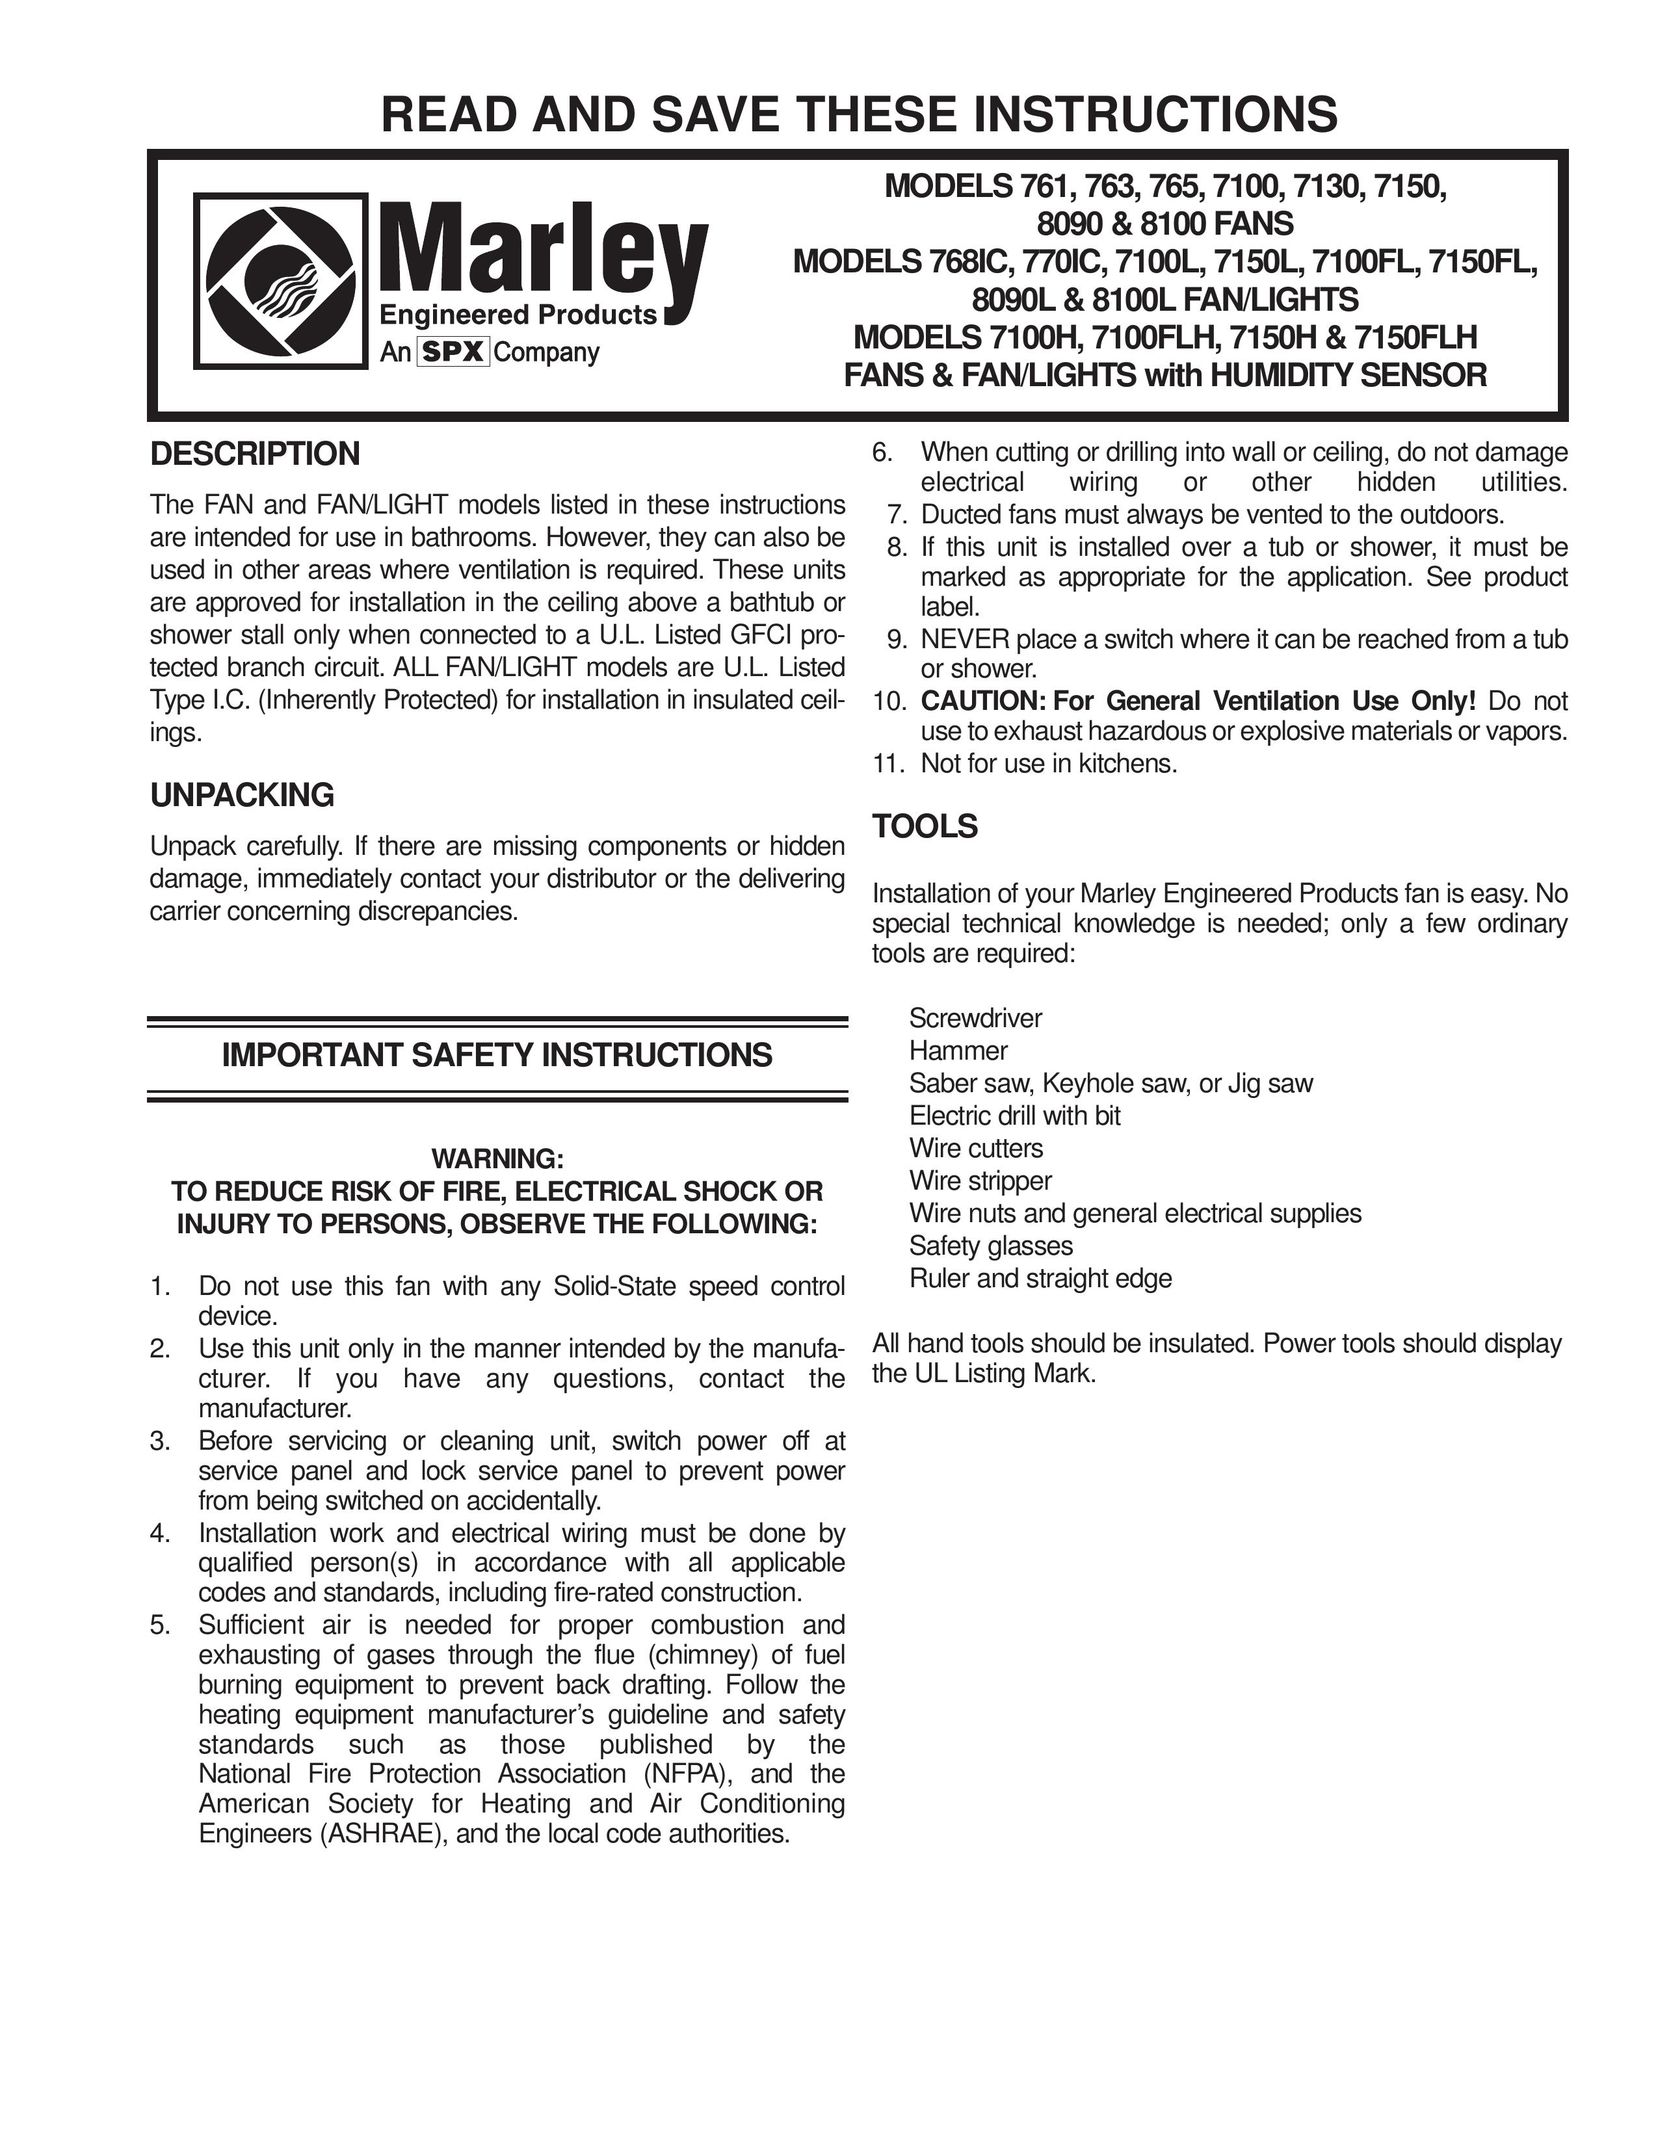 Marley Engineered Products 7150L Fan User Manual